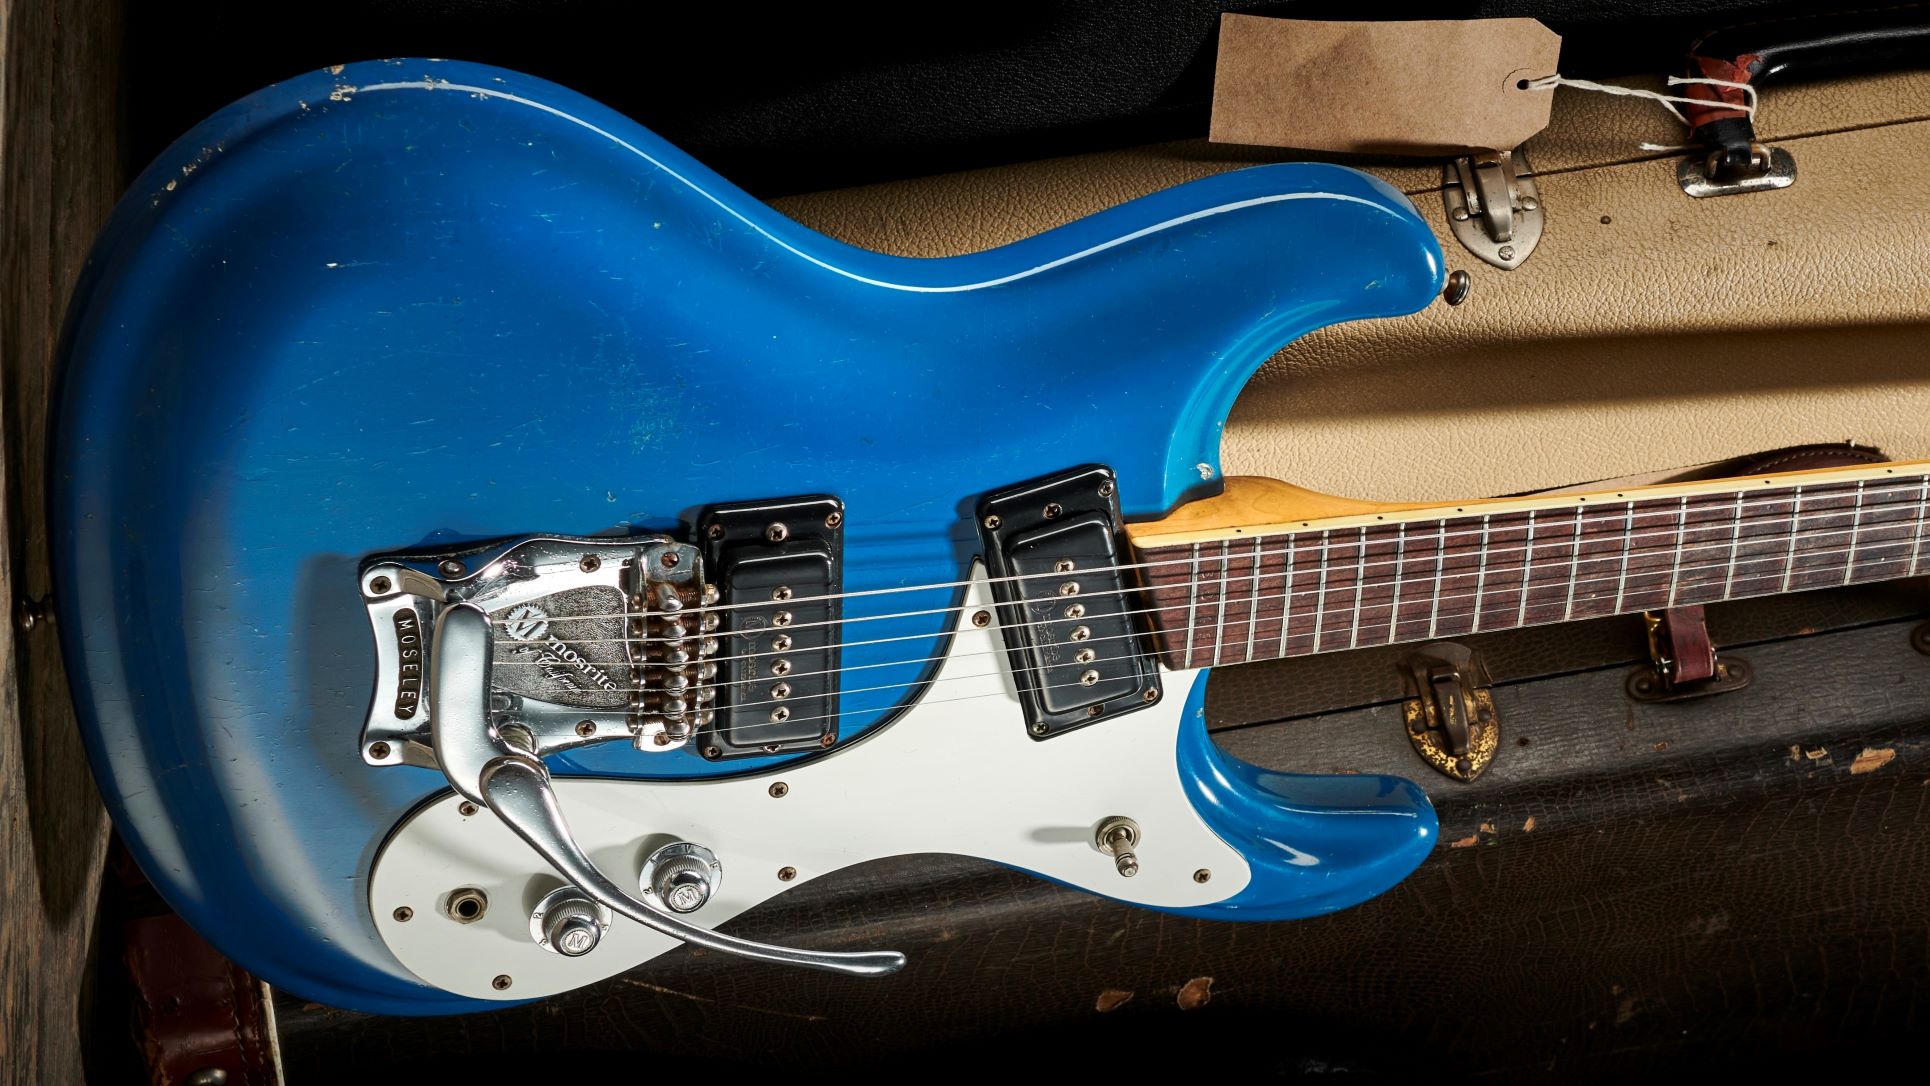 Why Are Mosrite Guitars So Expensive